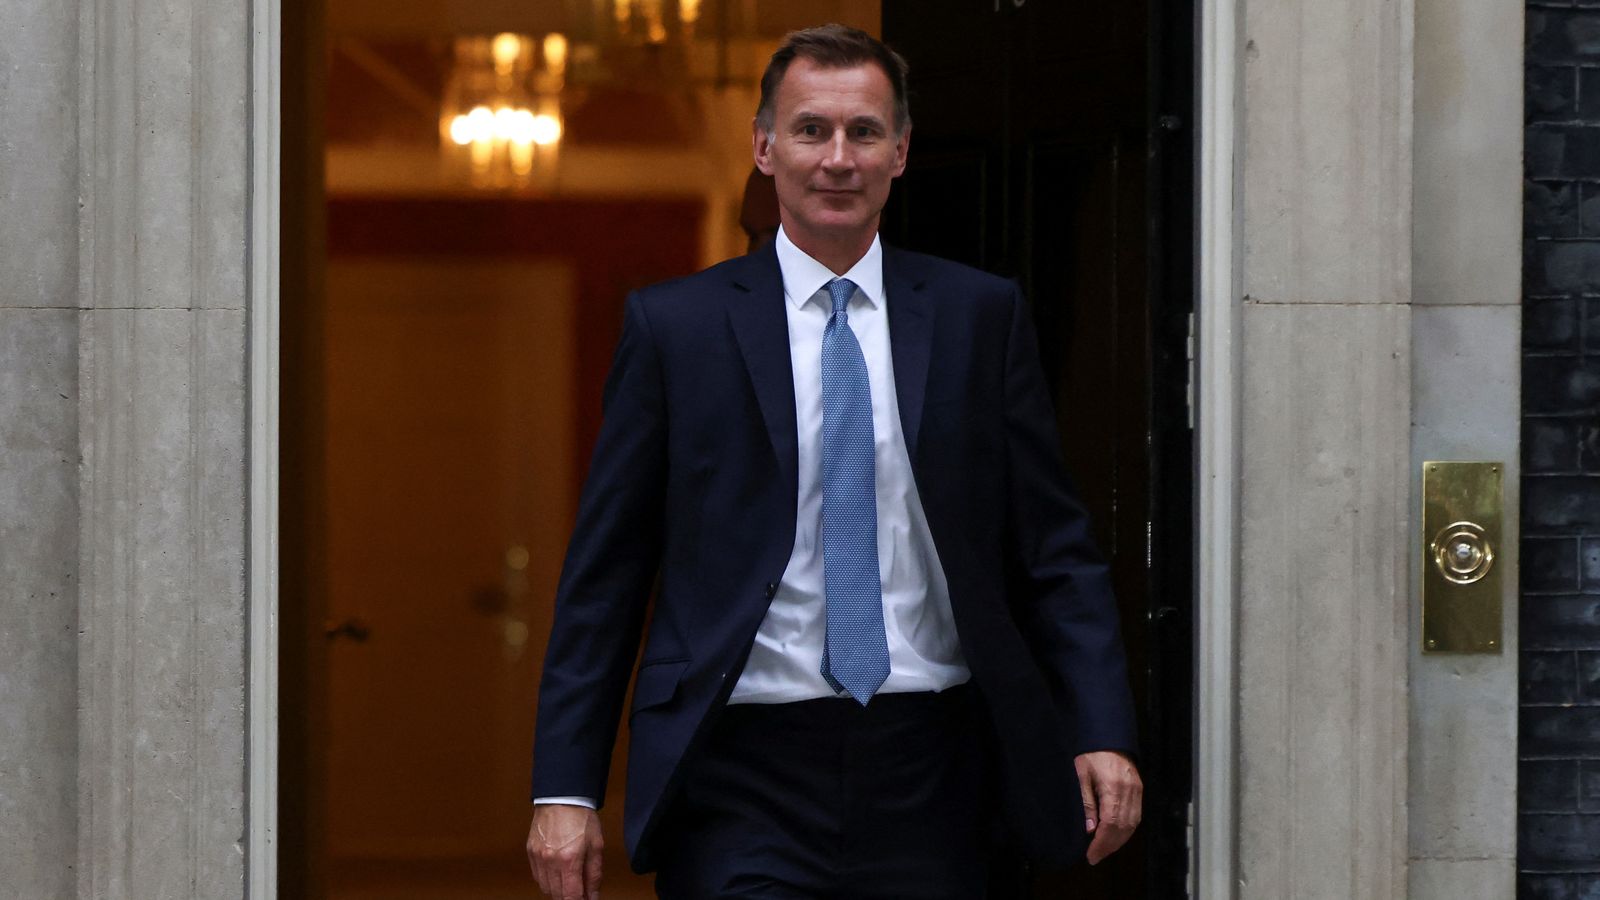 Hunt warns this week's budget is 'no time for rabbits' as he prepares for tough cuts to plug £55bn black hole